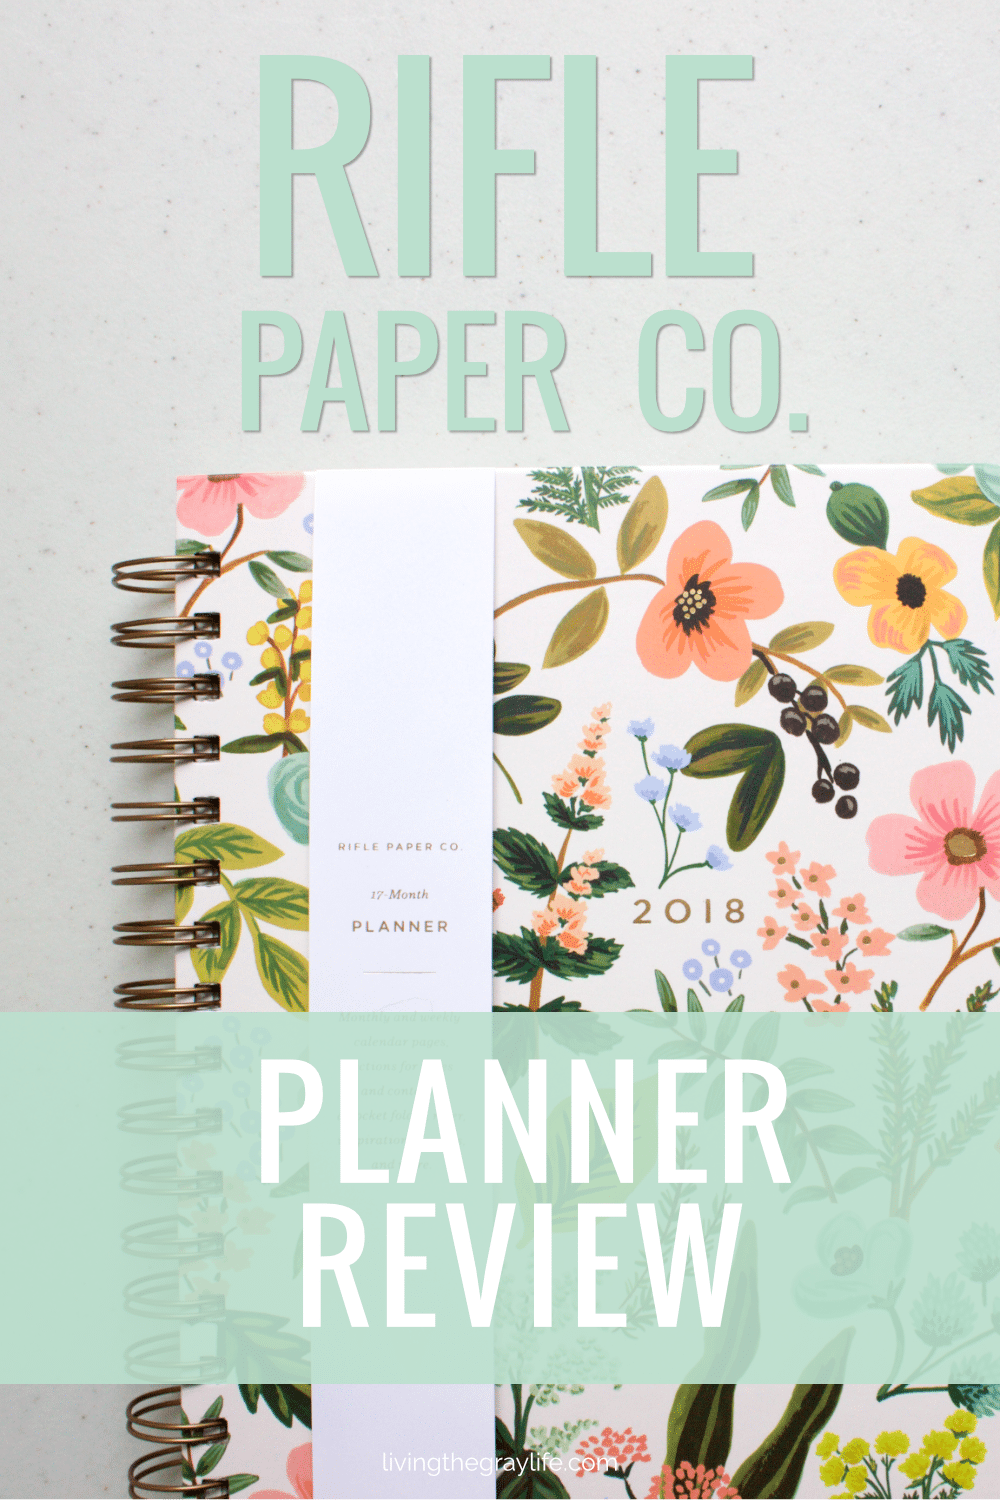 The Rifle Paper Co. Planner